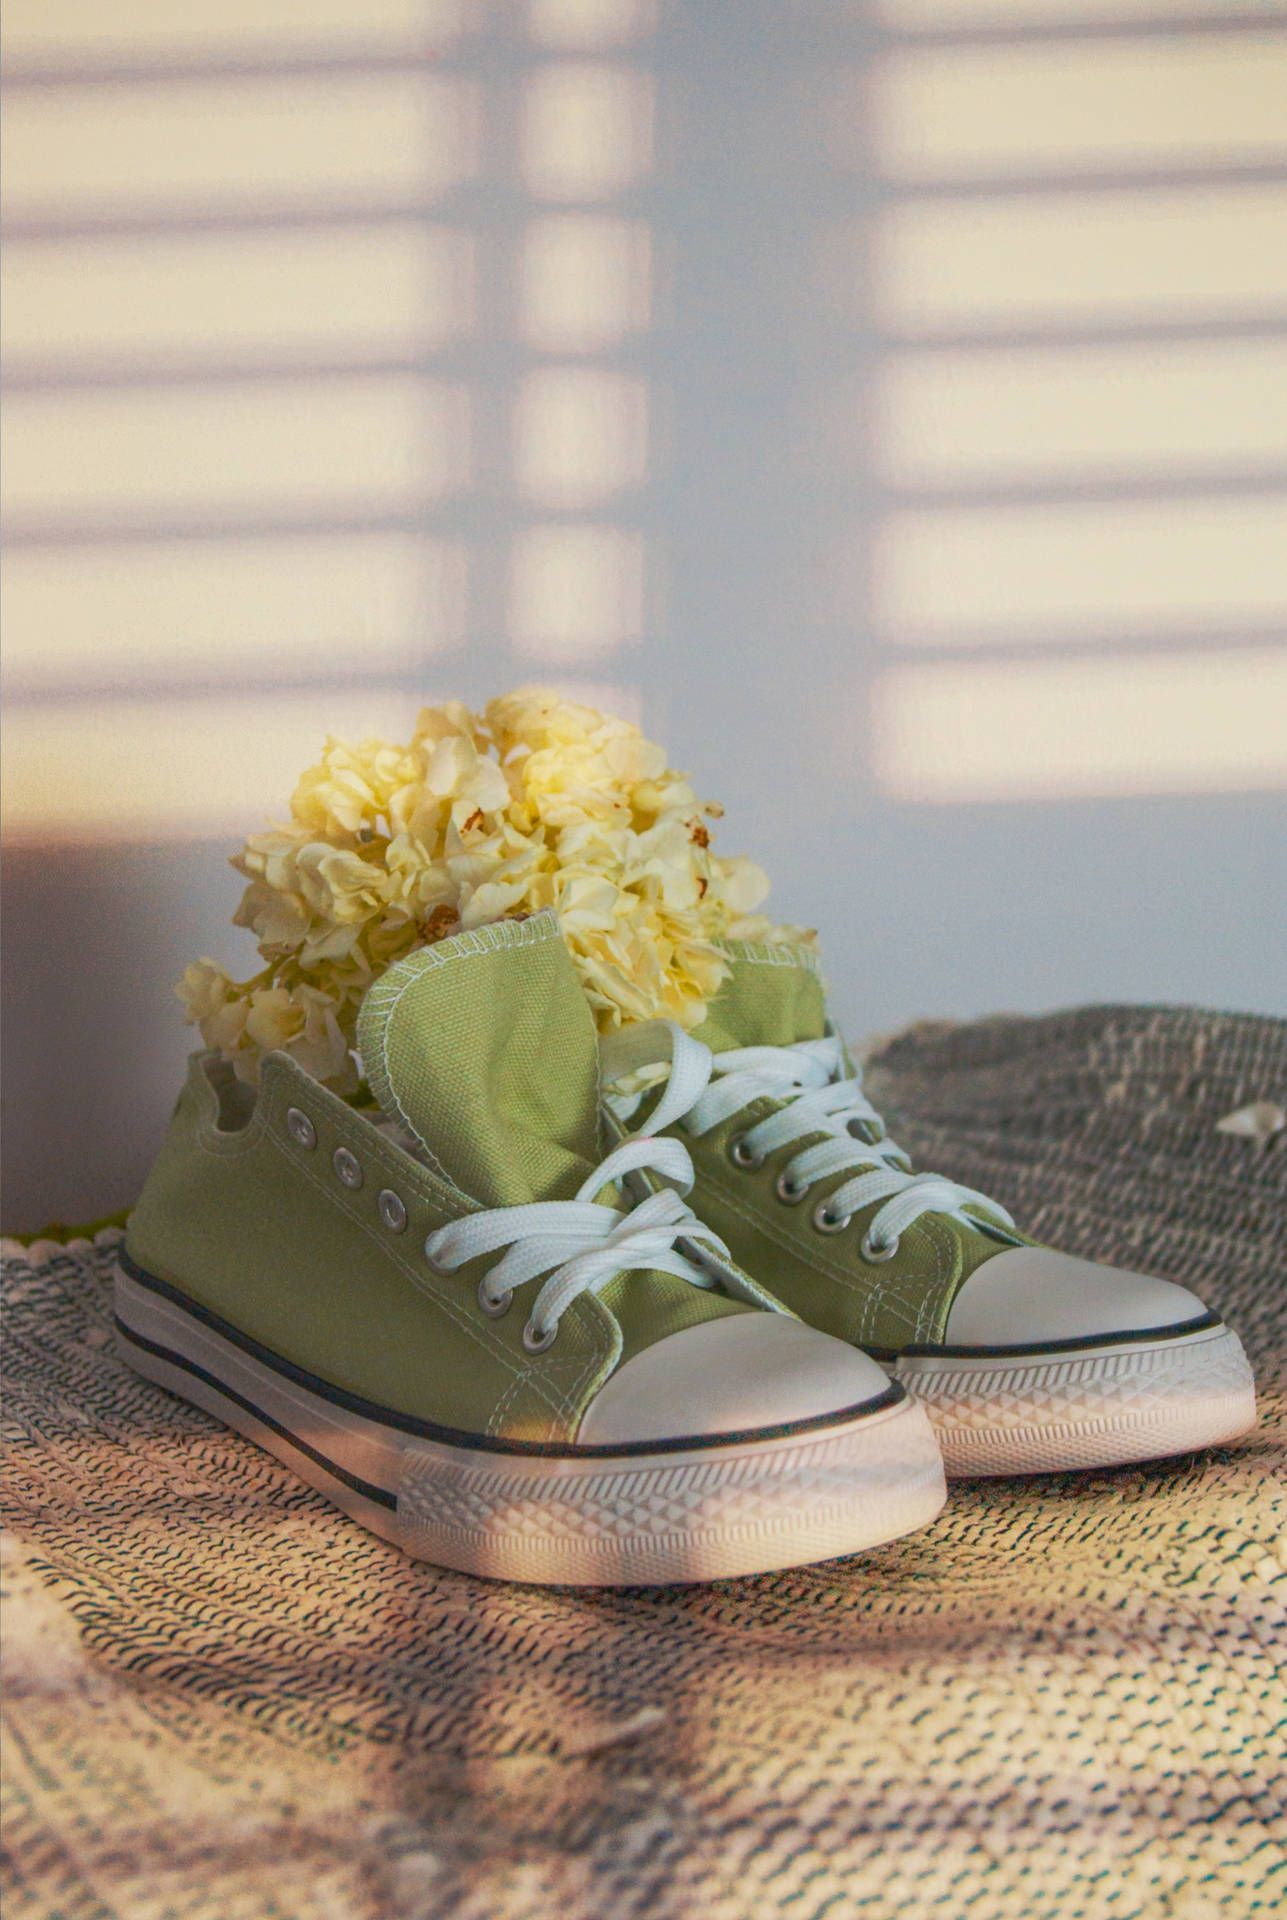 A pair of sneakers with flowers in them - Shoes, Converse, sage green